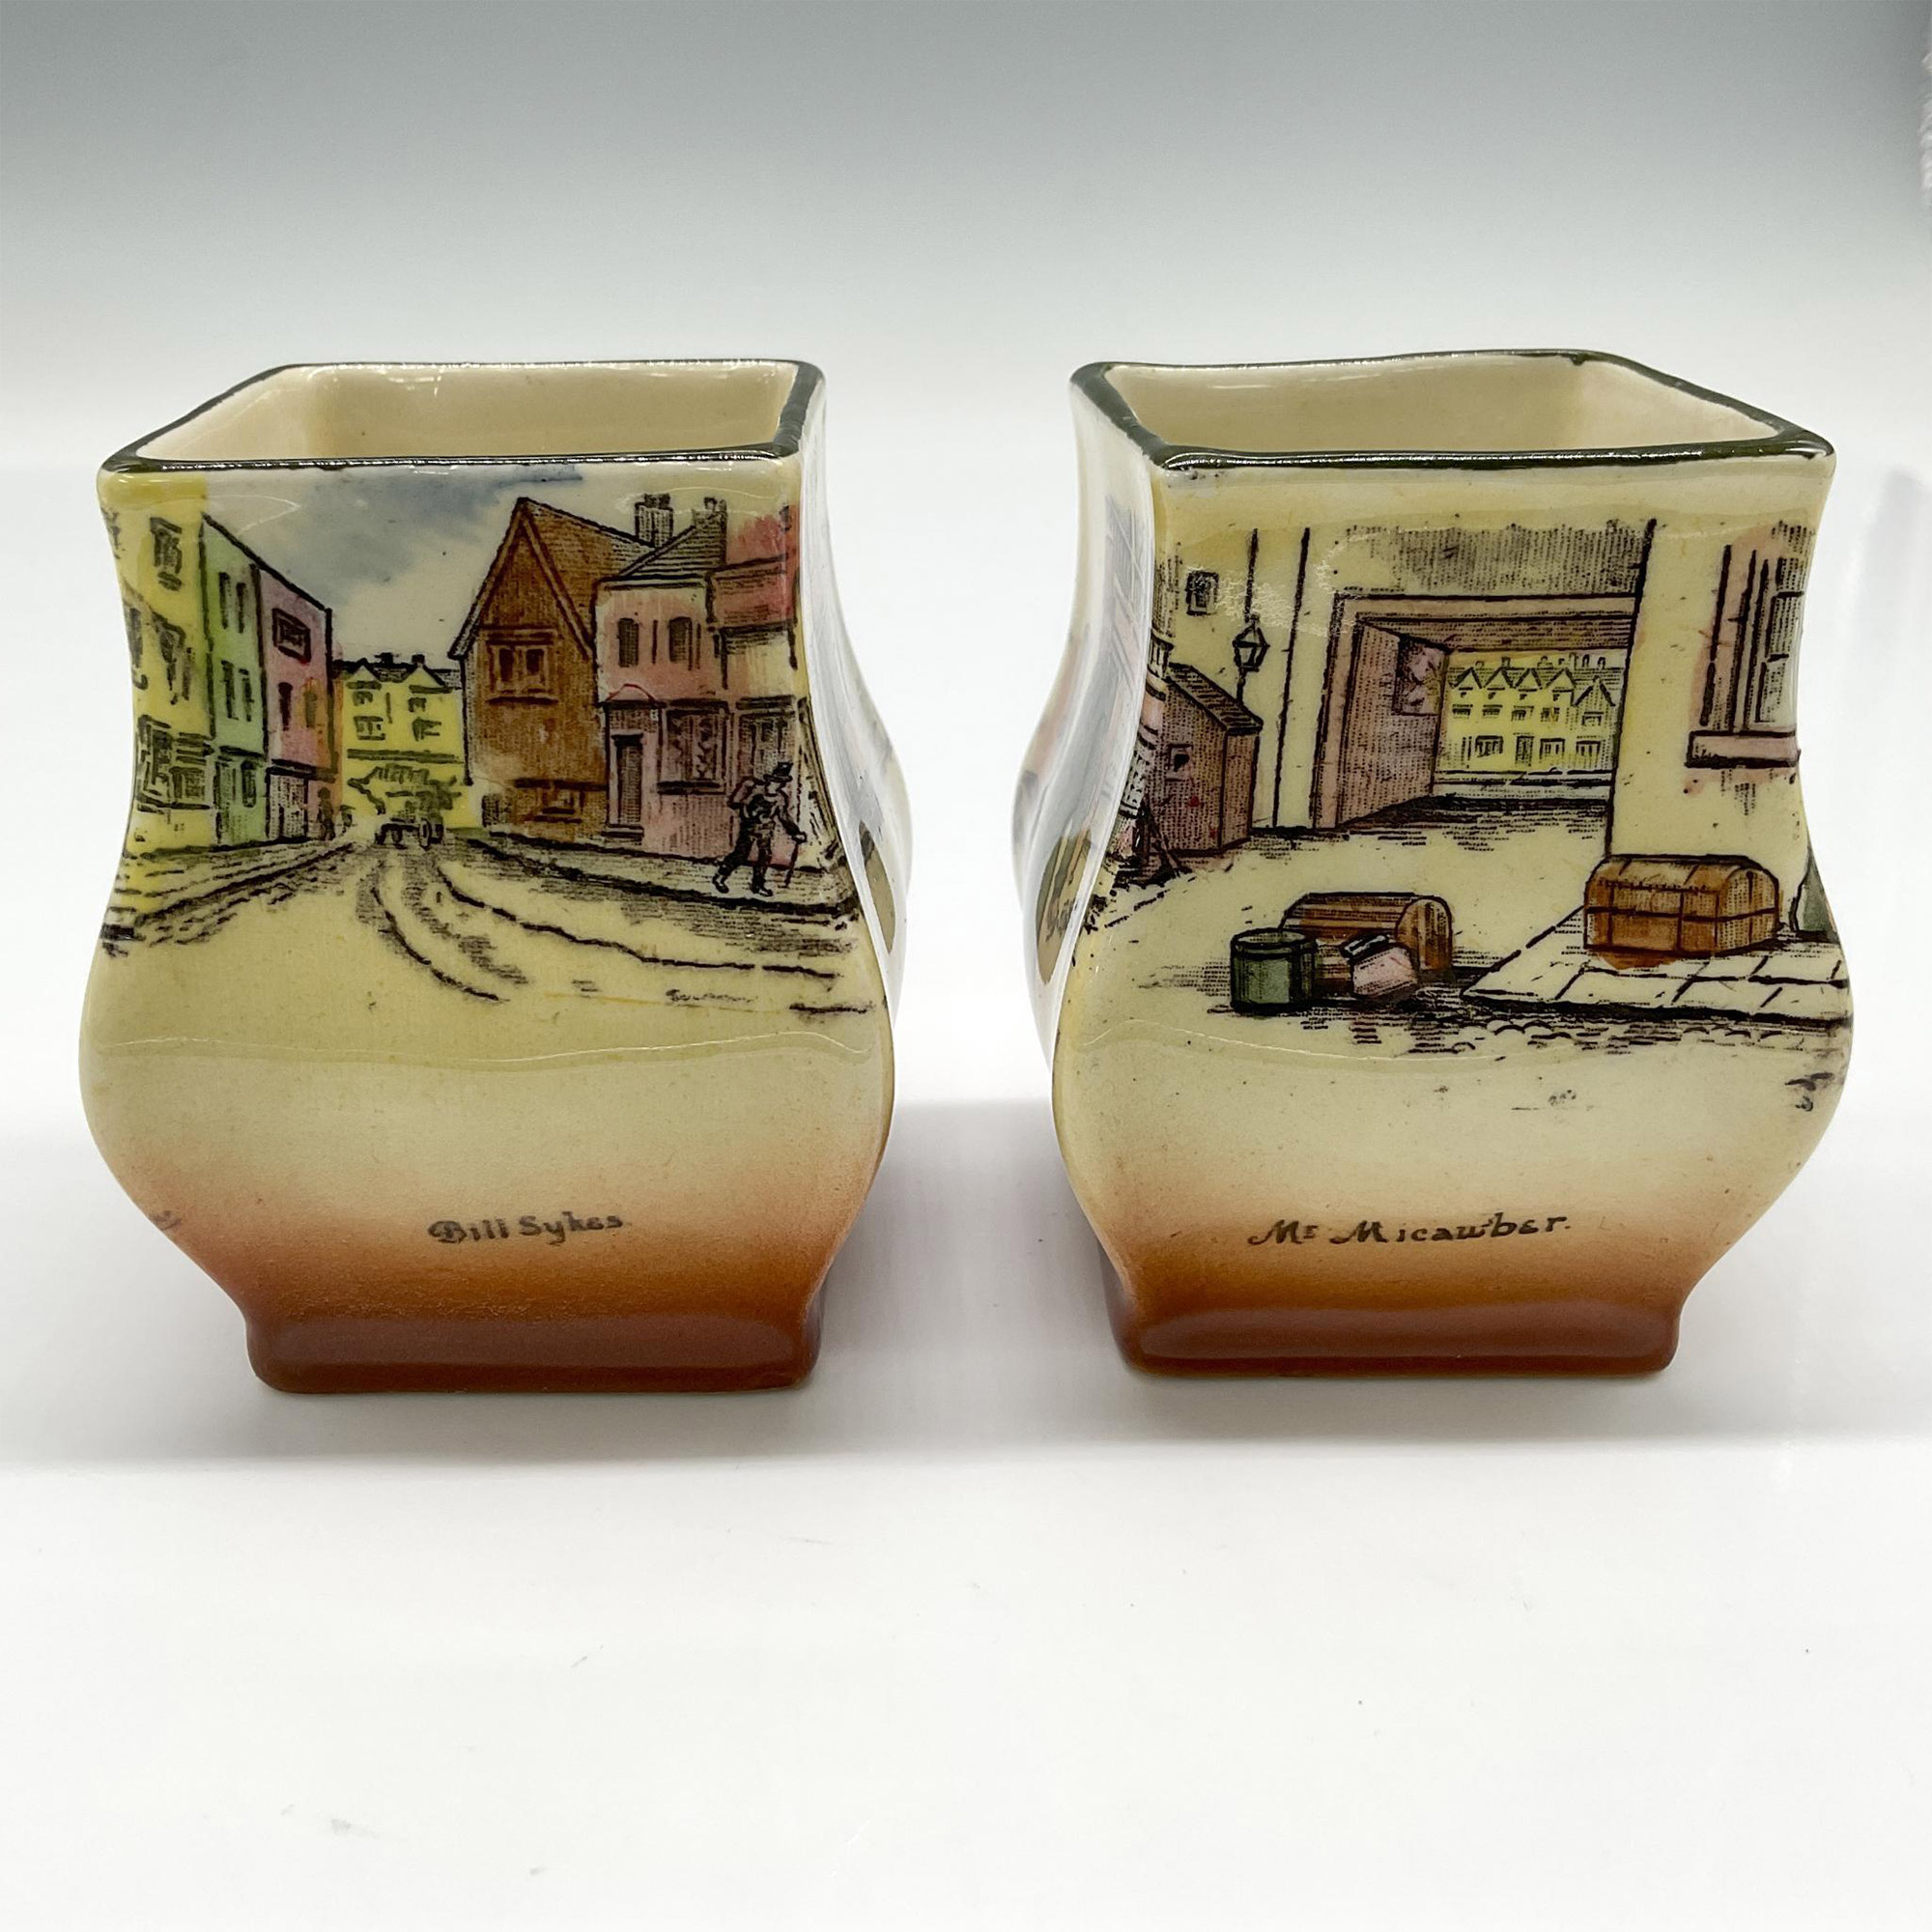 2pc Royal Doulton Dickens Vases, Mr. Micawber & Bill Sykes - Image 3 of 4